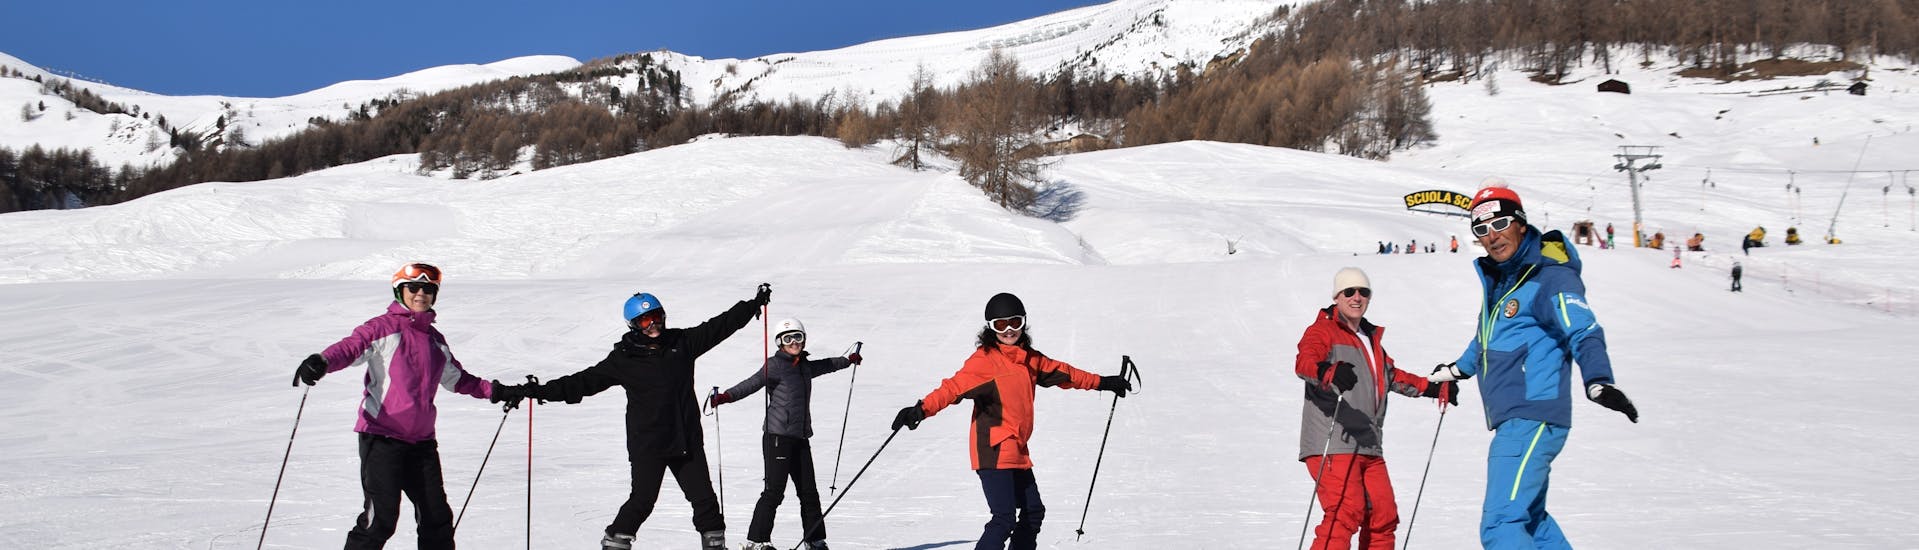 A family spending their day on the snow together in Livigno during one of the Private Ski Lessons for Families & Friends.